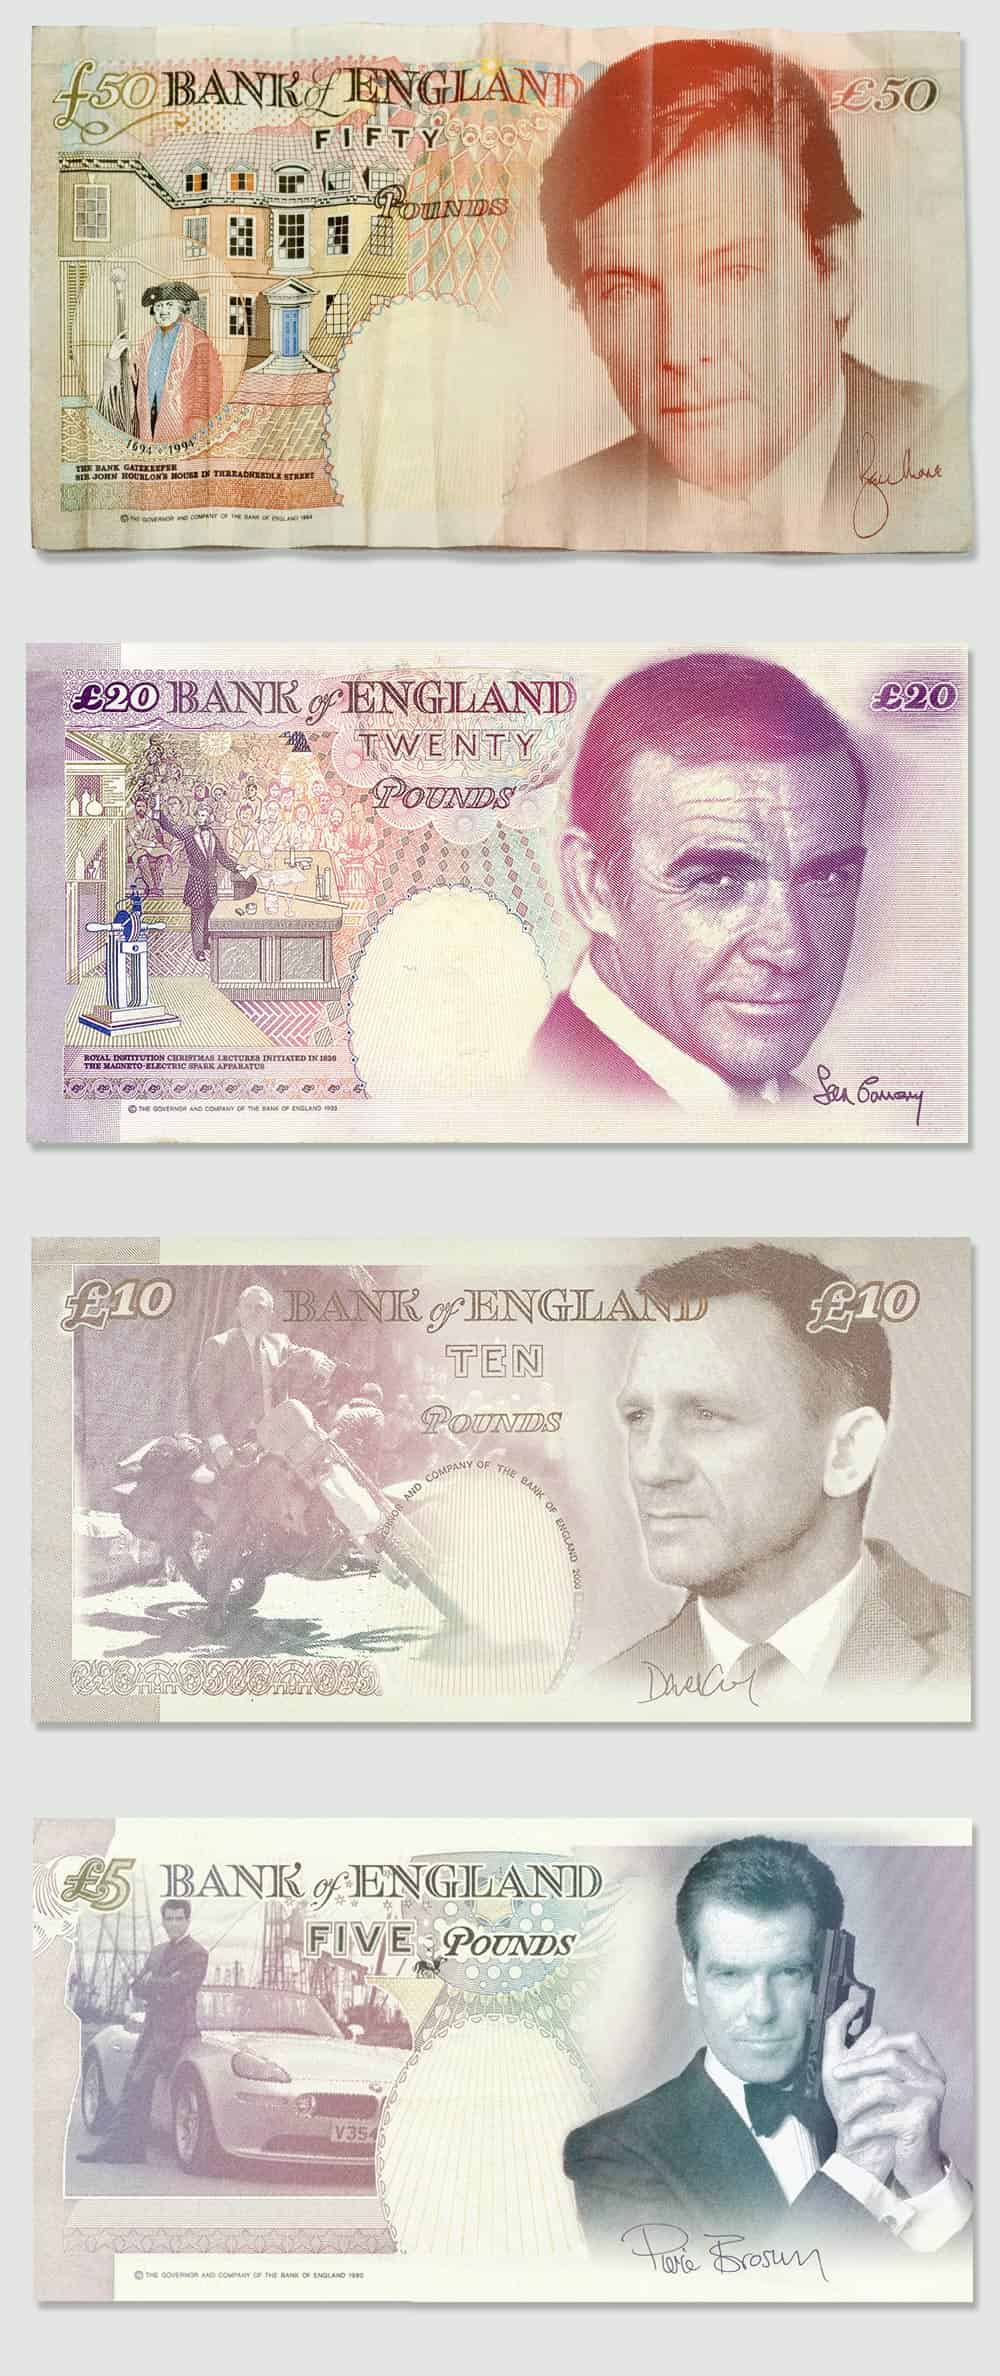 Queen to be removed from Bank of England notes. - Page 1 - News, Politics & Economics - PistonHeads